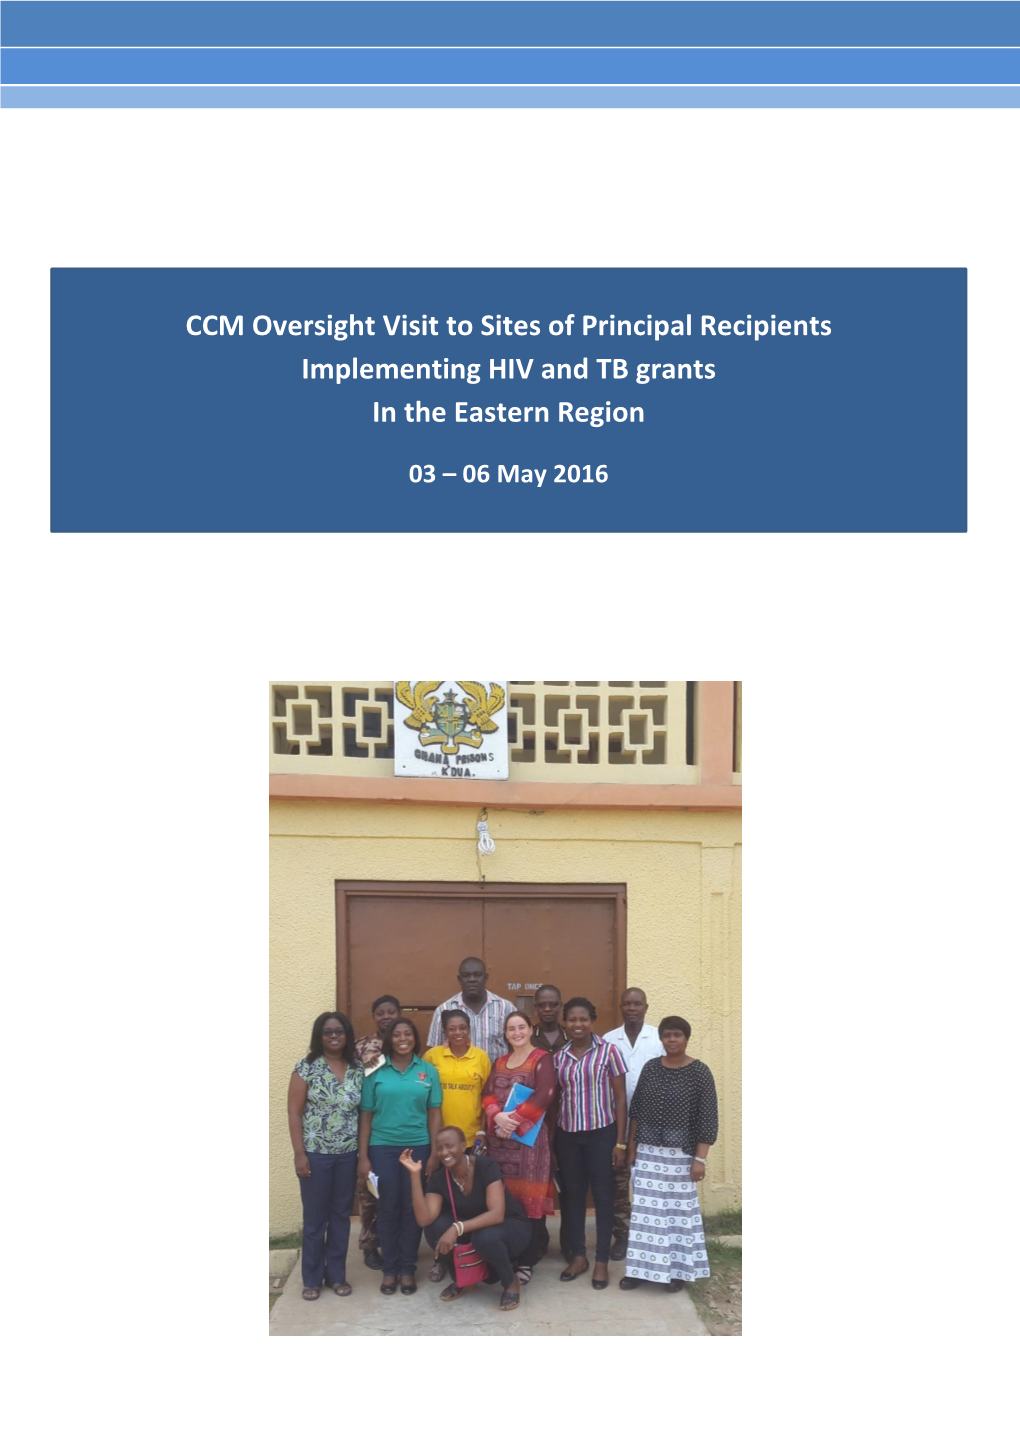 CCM Oversight Visit to Sites of Principal Recipients Implementing HIV and TB Grants in the Eastern Region